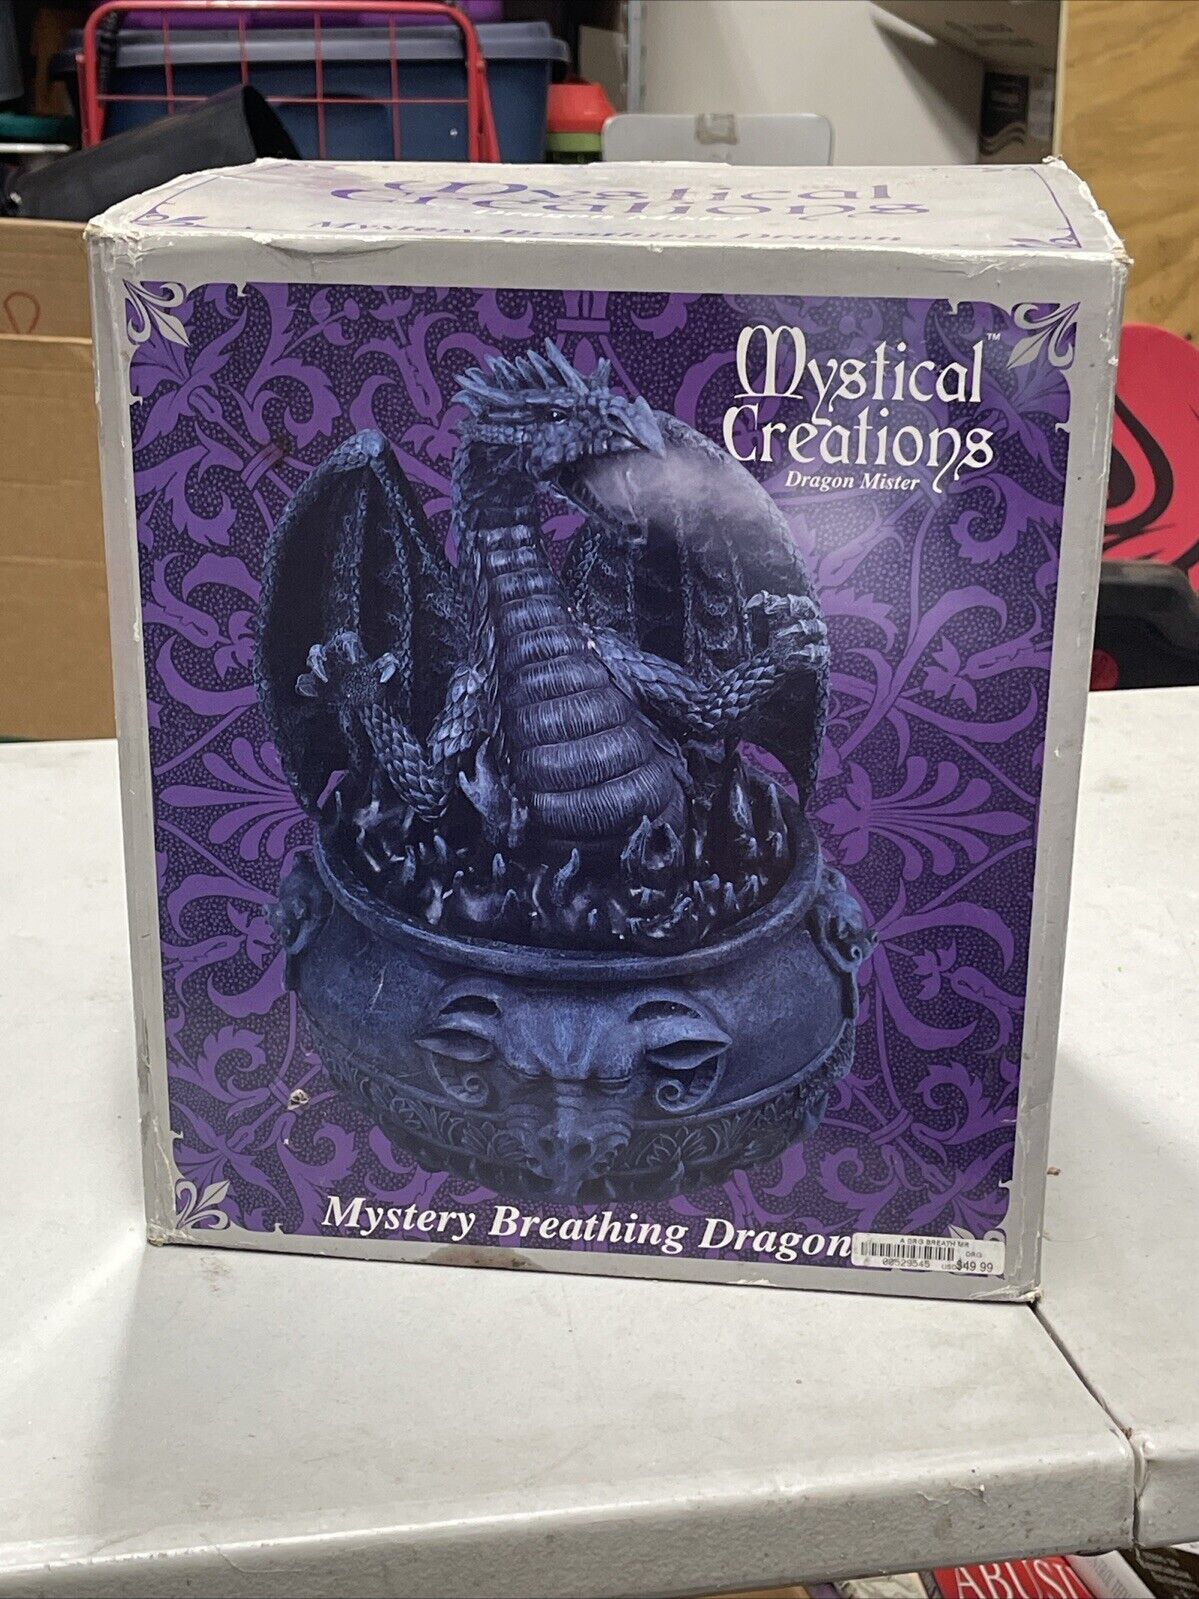 NOS Mystical Creations Dragon Mister Mystery Breathing Dragon Spencer Gifts NEW